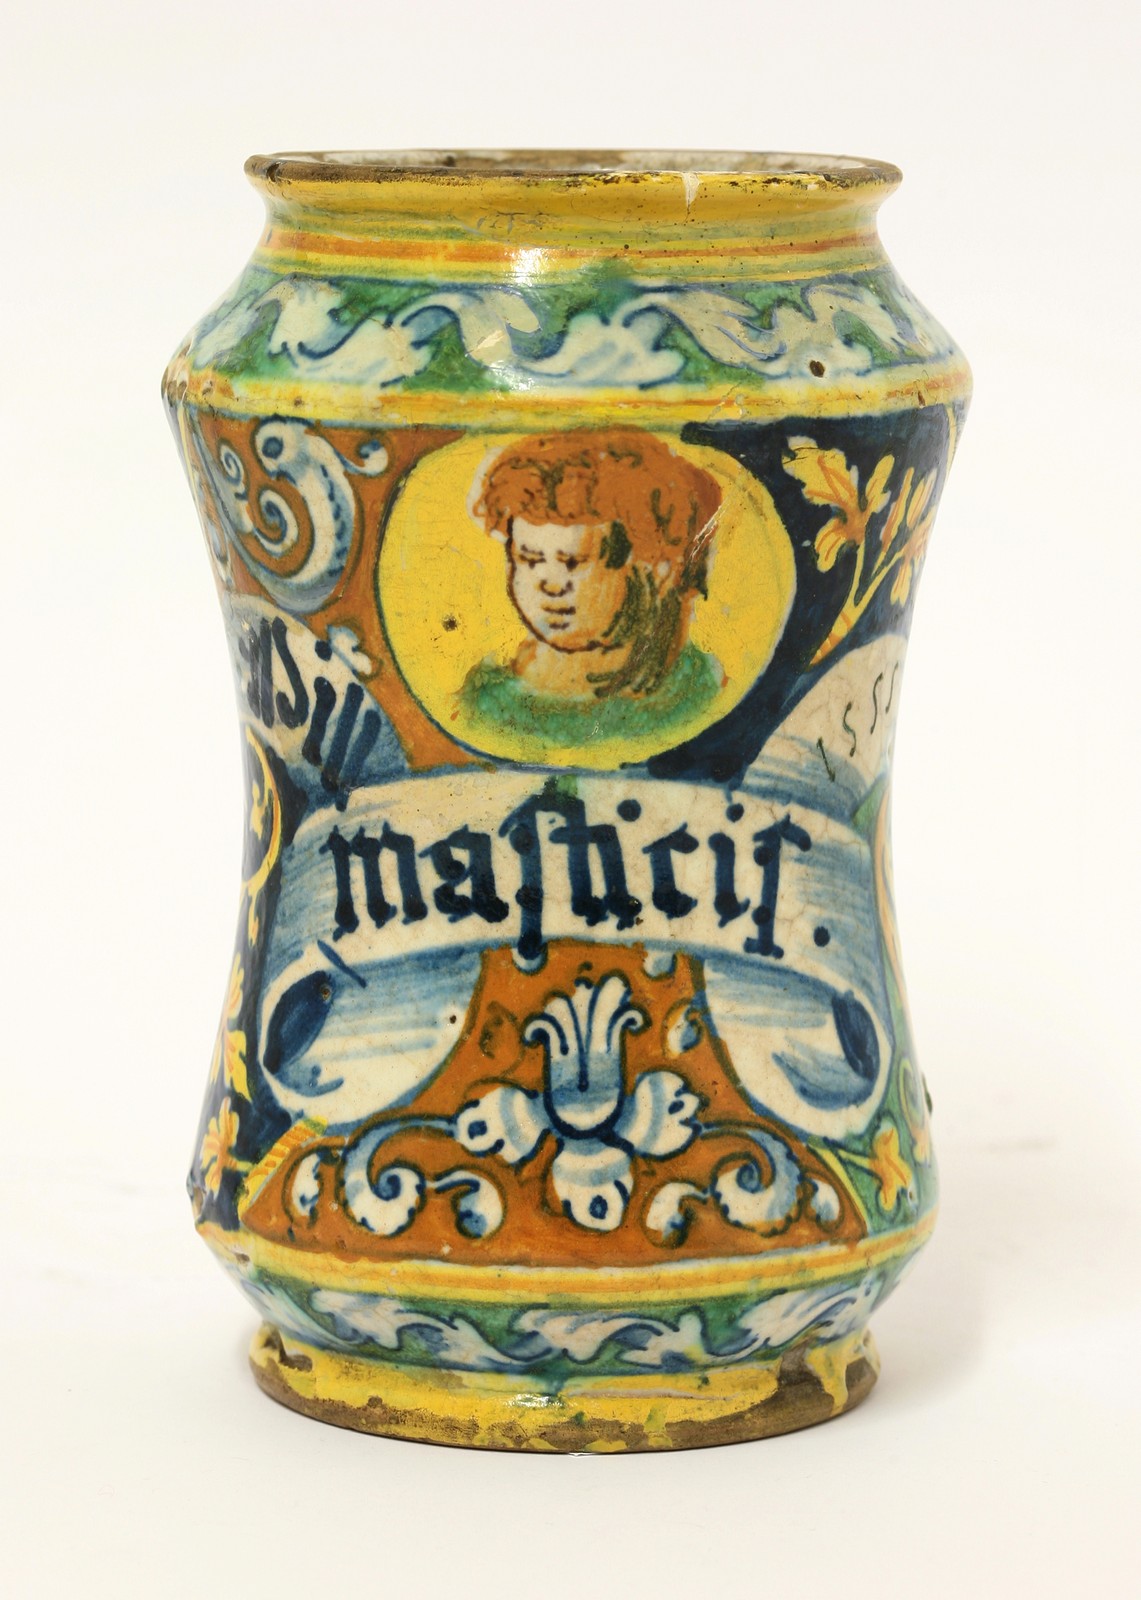 A dated maiolica Albarello,
1555, painted with a portrait of a boy above a label inscribed